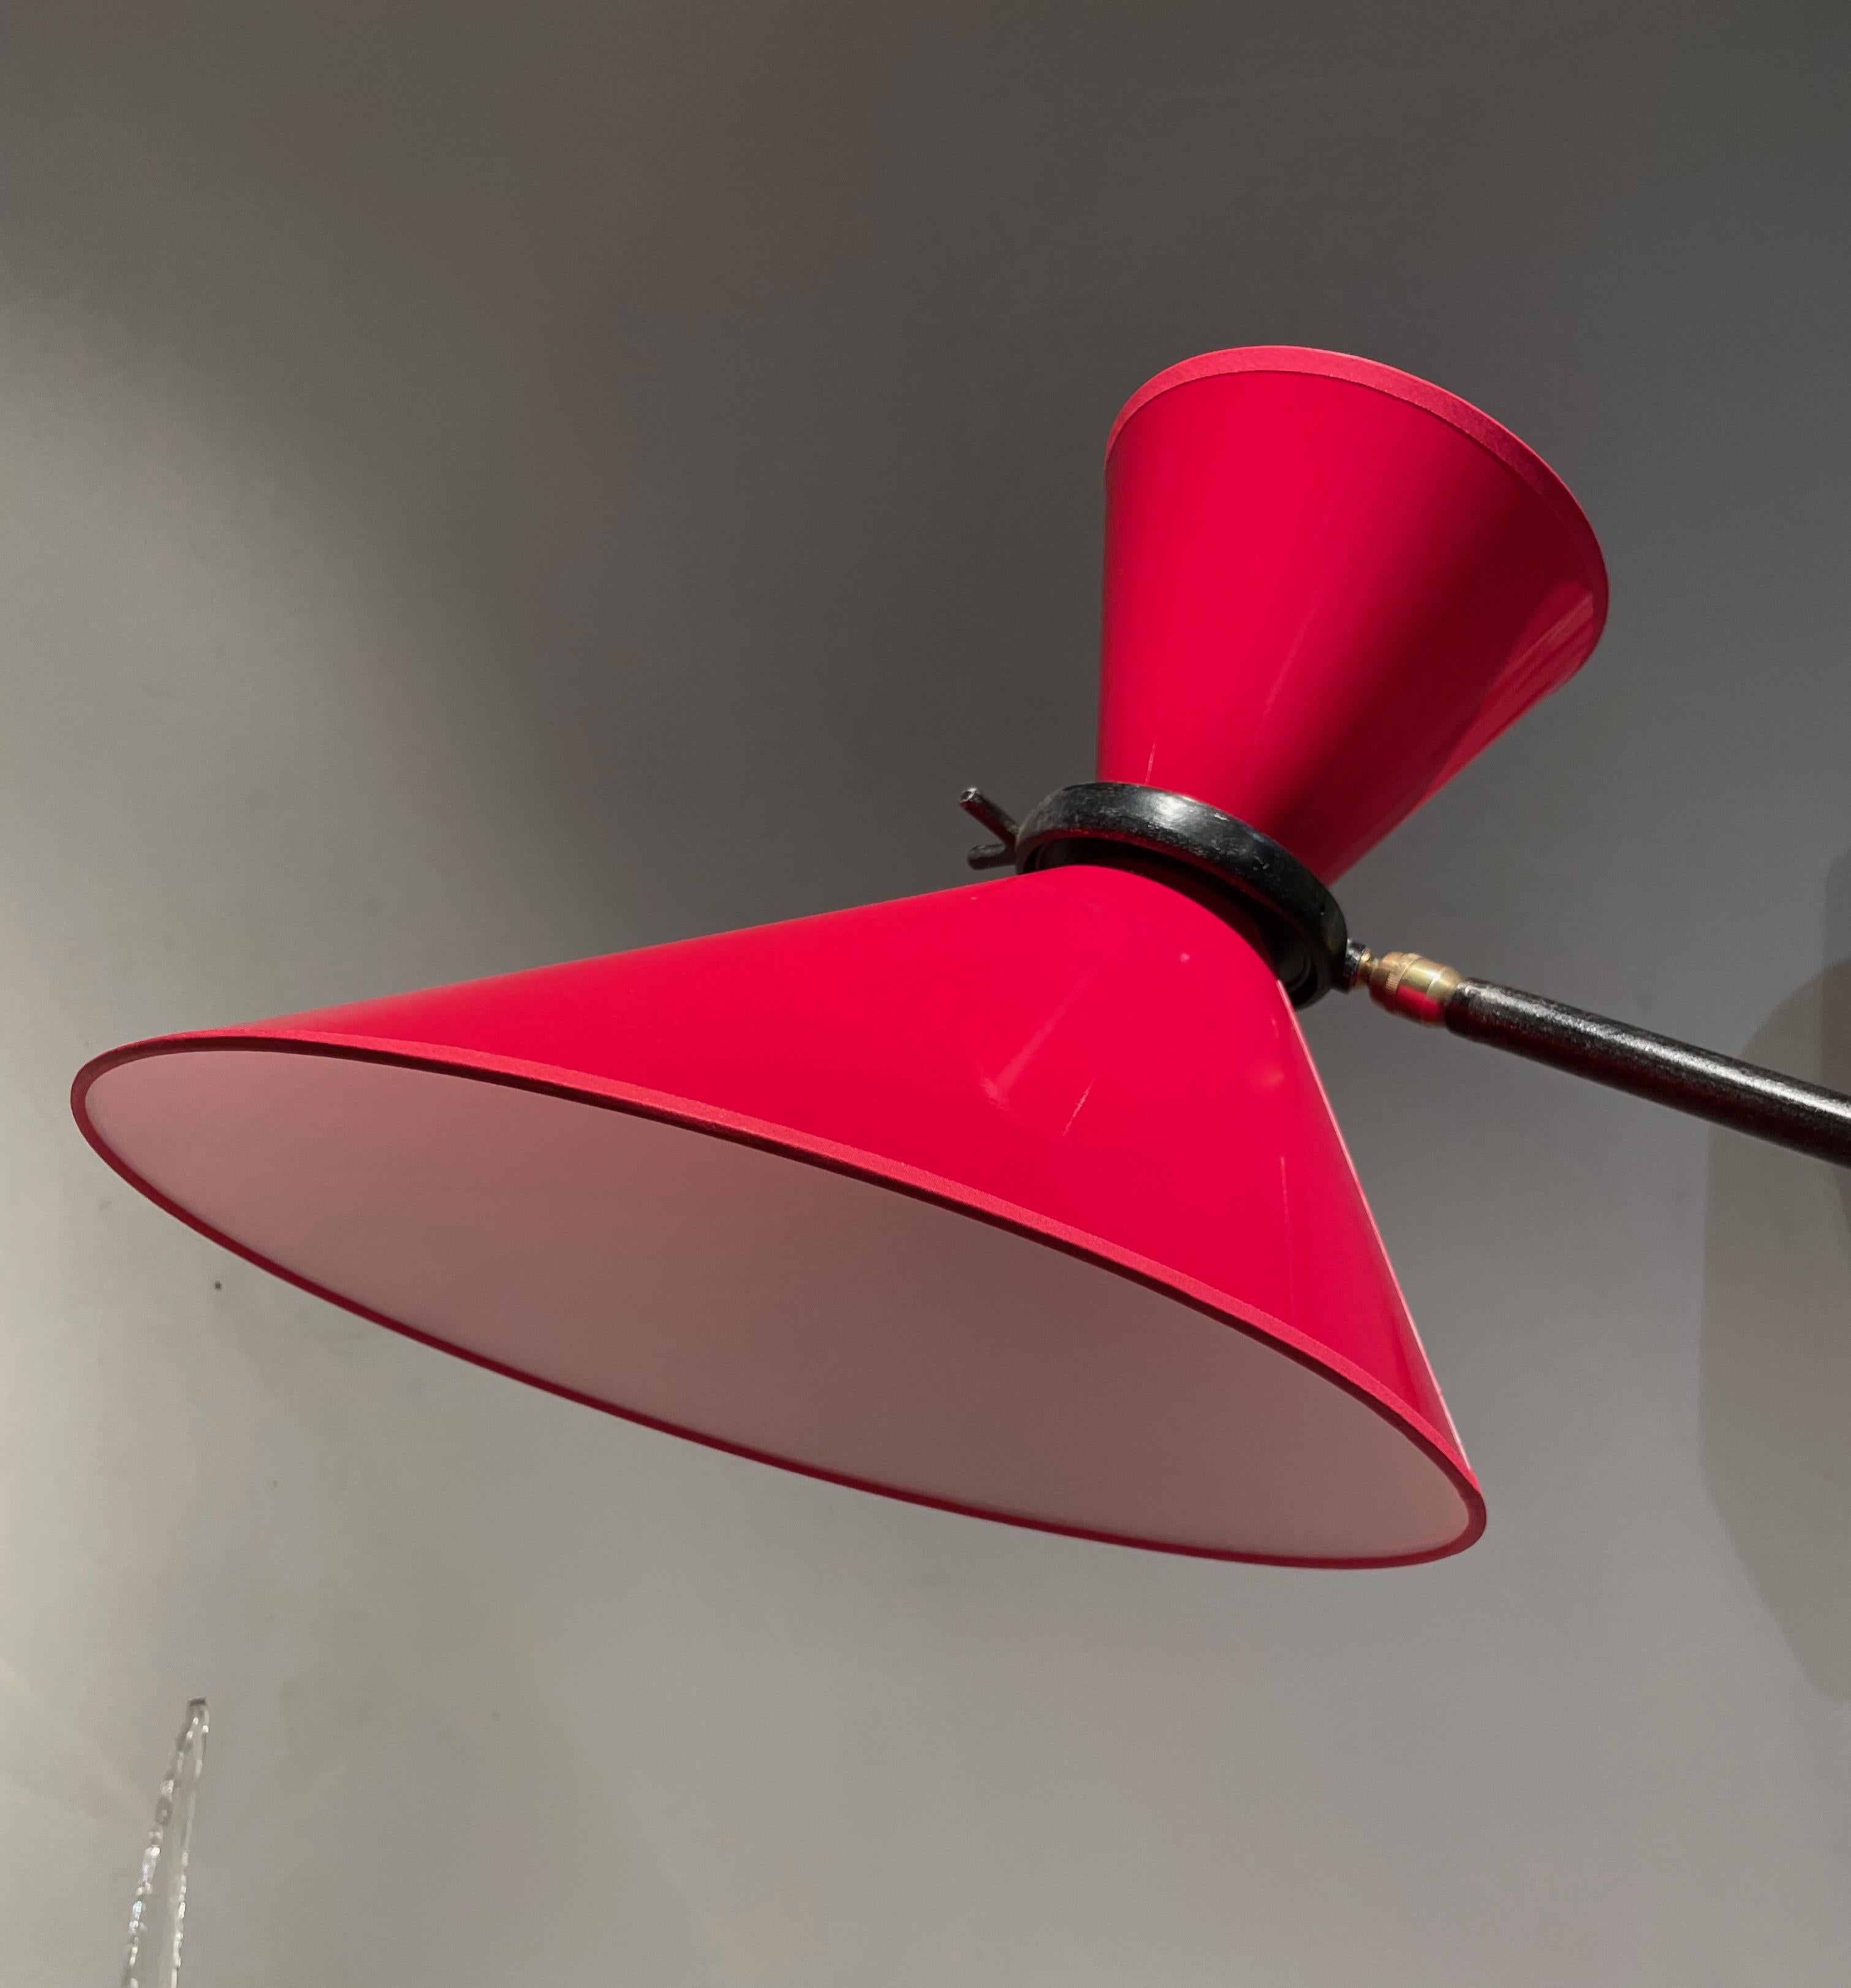 Mid-Century Modern 50's Adjustable Floor Lamp With Red Diabolo Shade by Maison Lunel, France 1954. For Sale